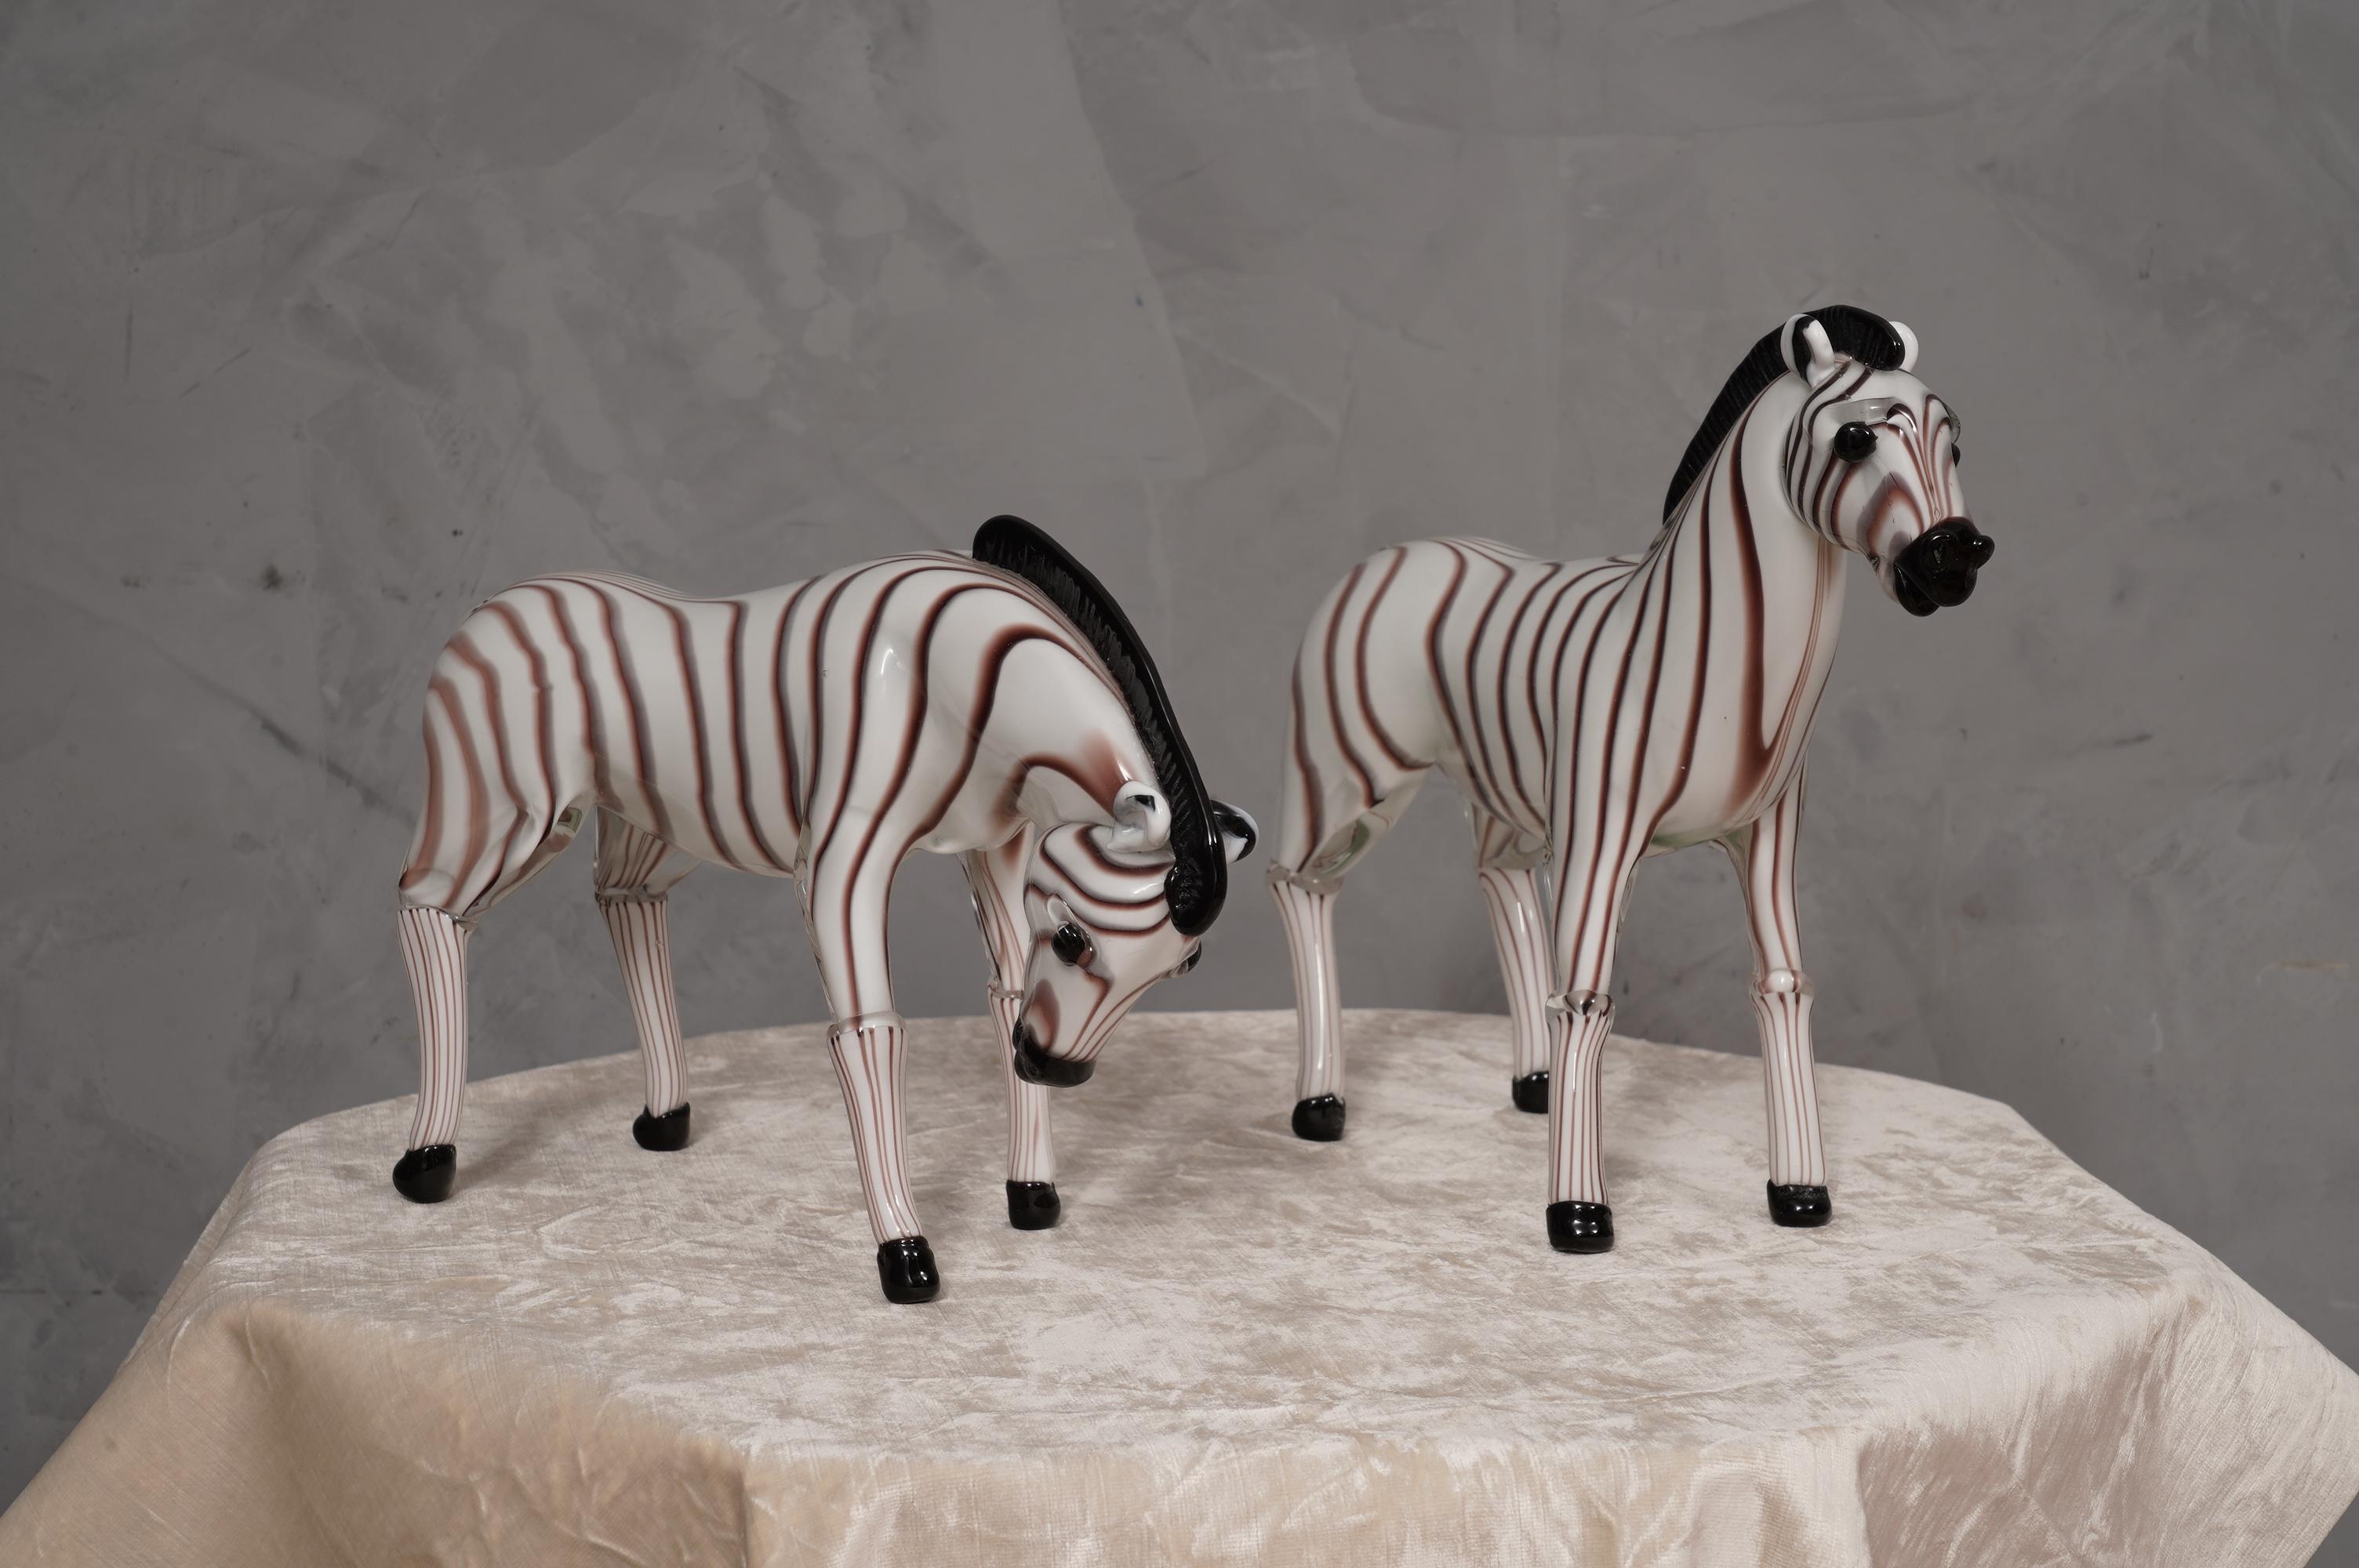 Superb pair of Murano glass sculptures representing two beautiful zebras, unmistakable Murano design. Enchanting to the eye, they require a beautiful illuminated display case.

The two zebras are in Murano glass, white with black streaks. The